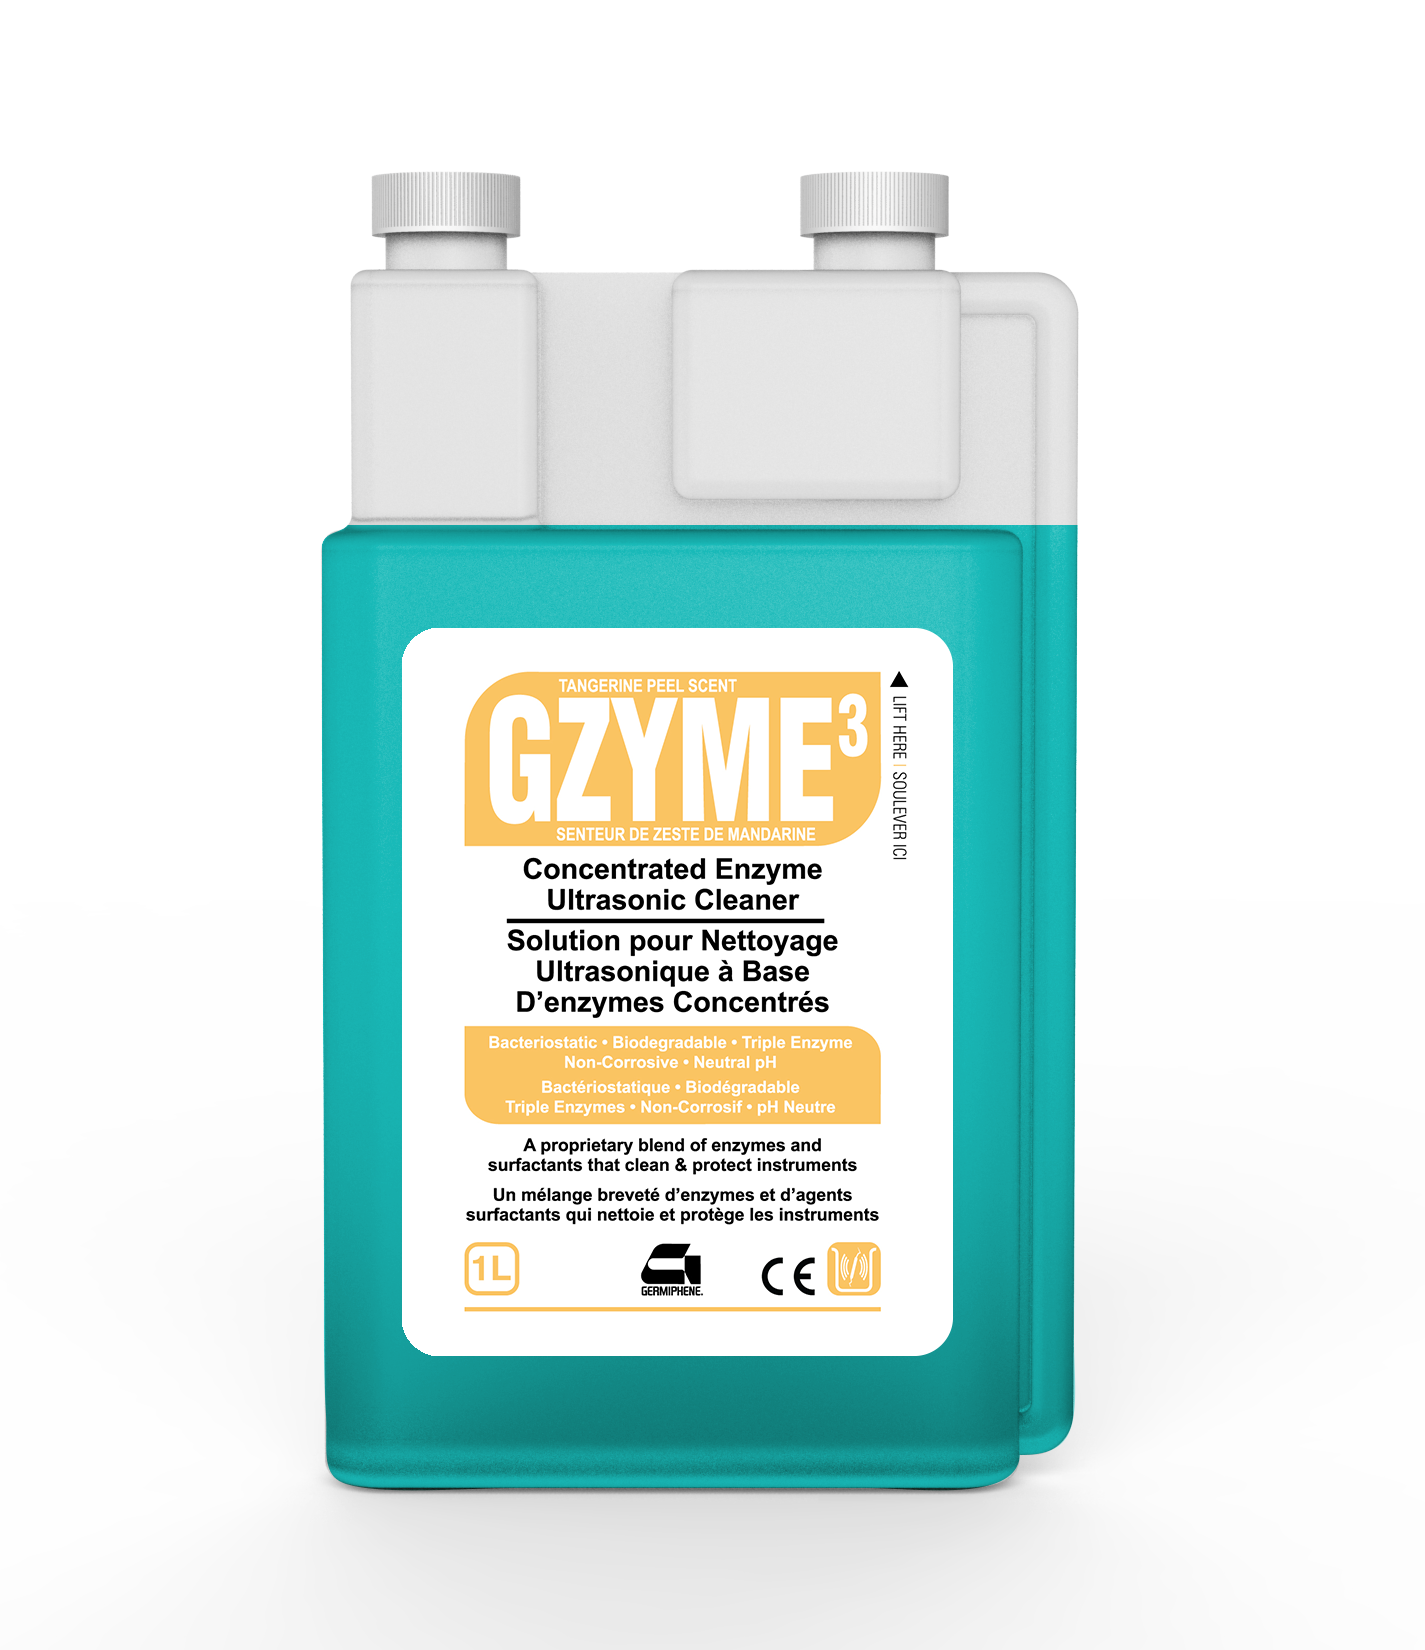 Gzyme3 | Enzymatic Cleaning Solution